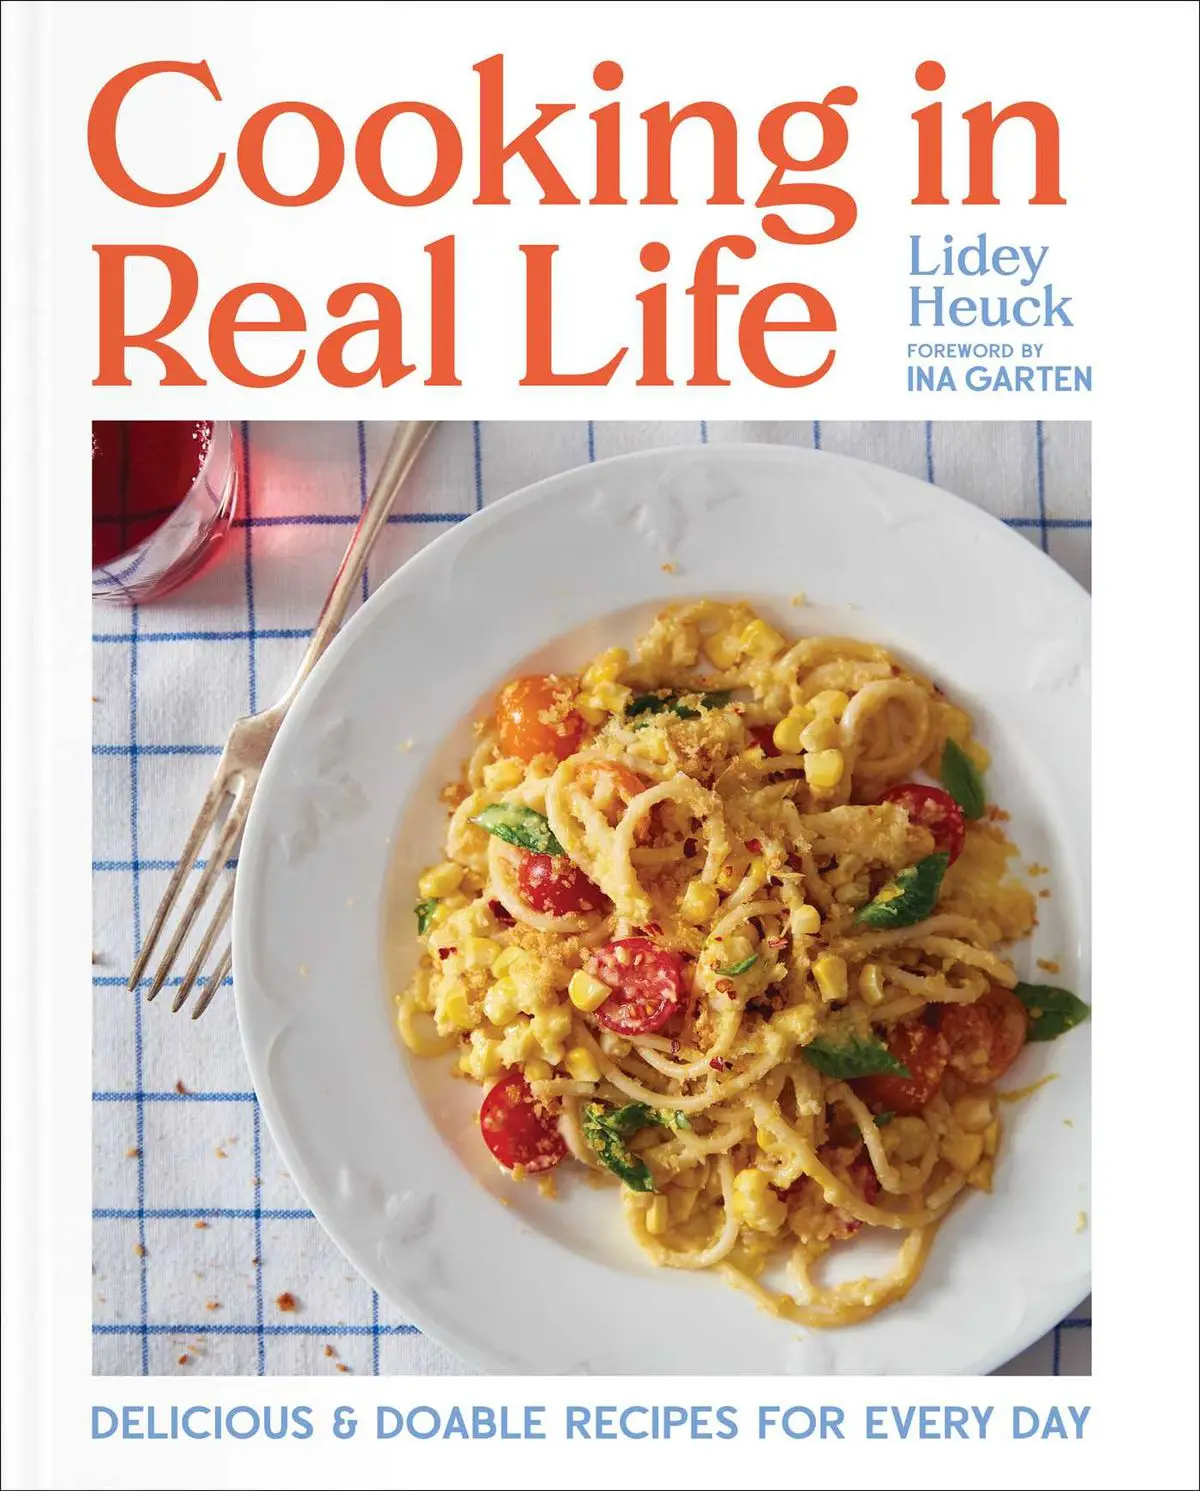 The cover of Cooking in Real Life